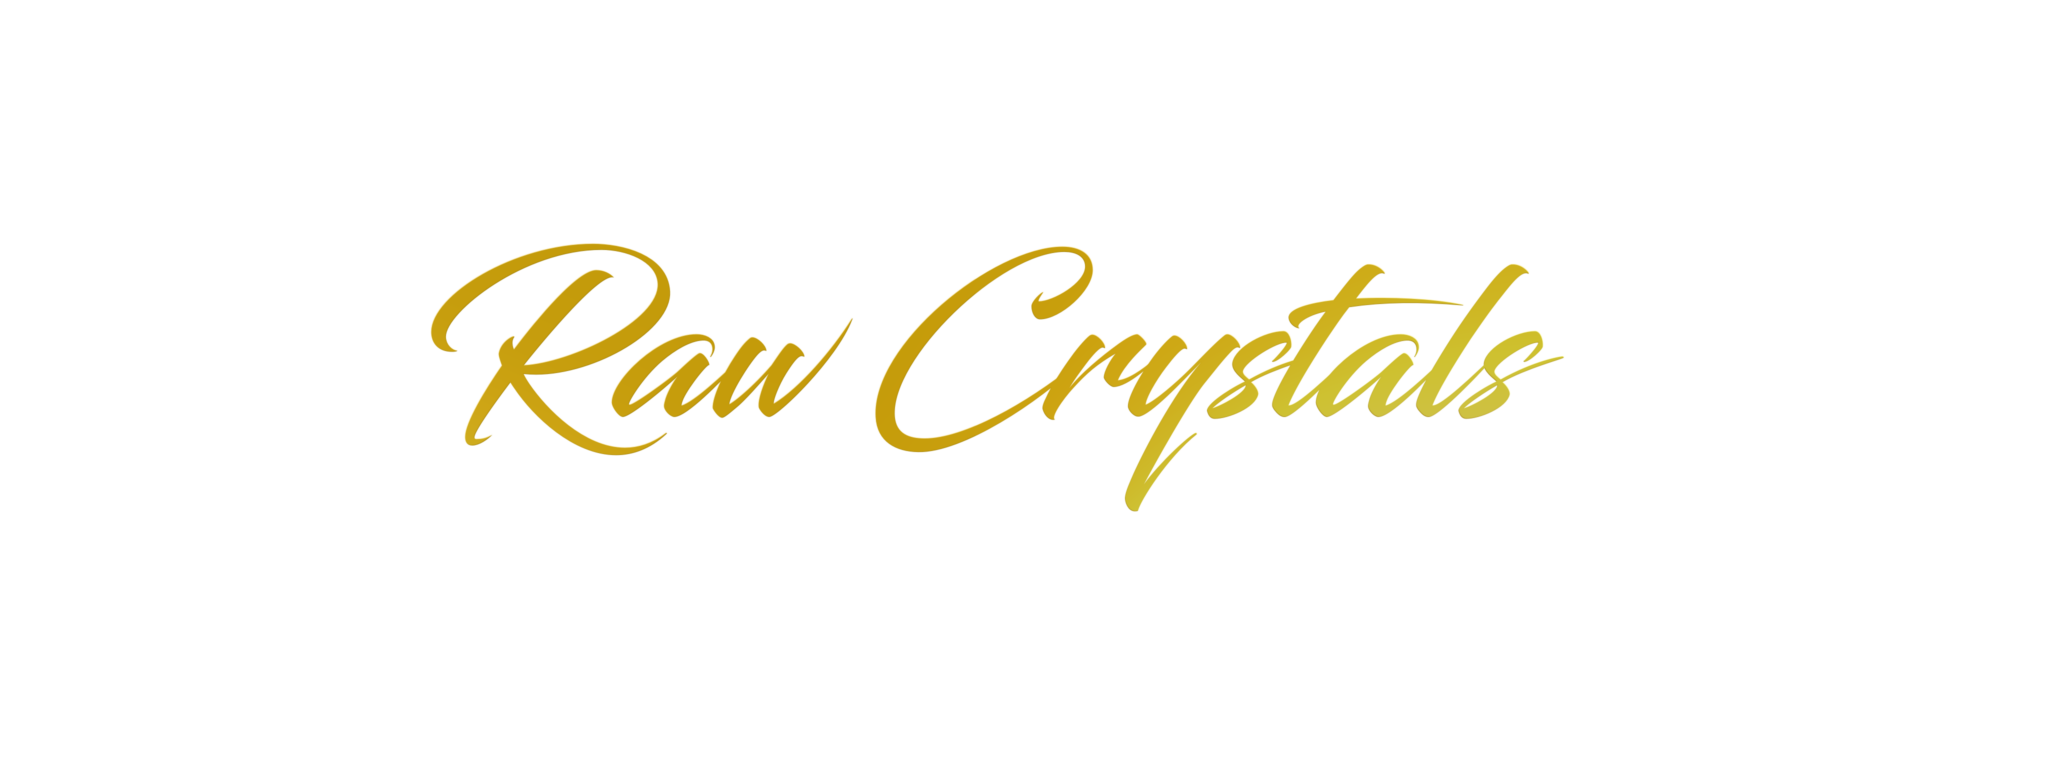 Gold Shop by Raw Crystals Lettering Group